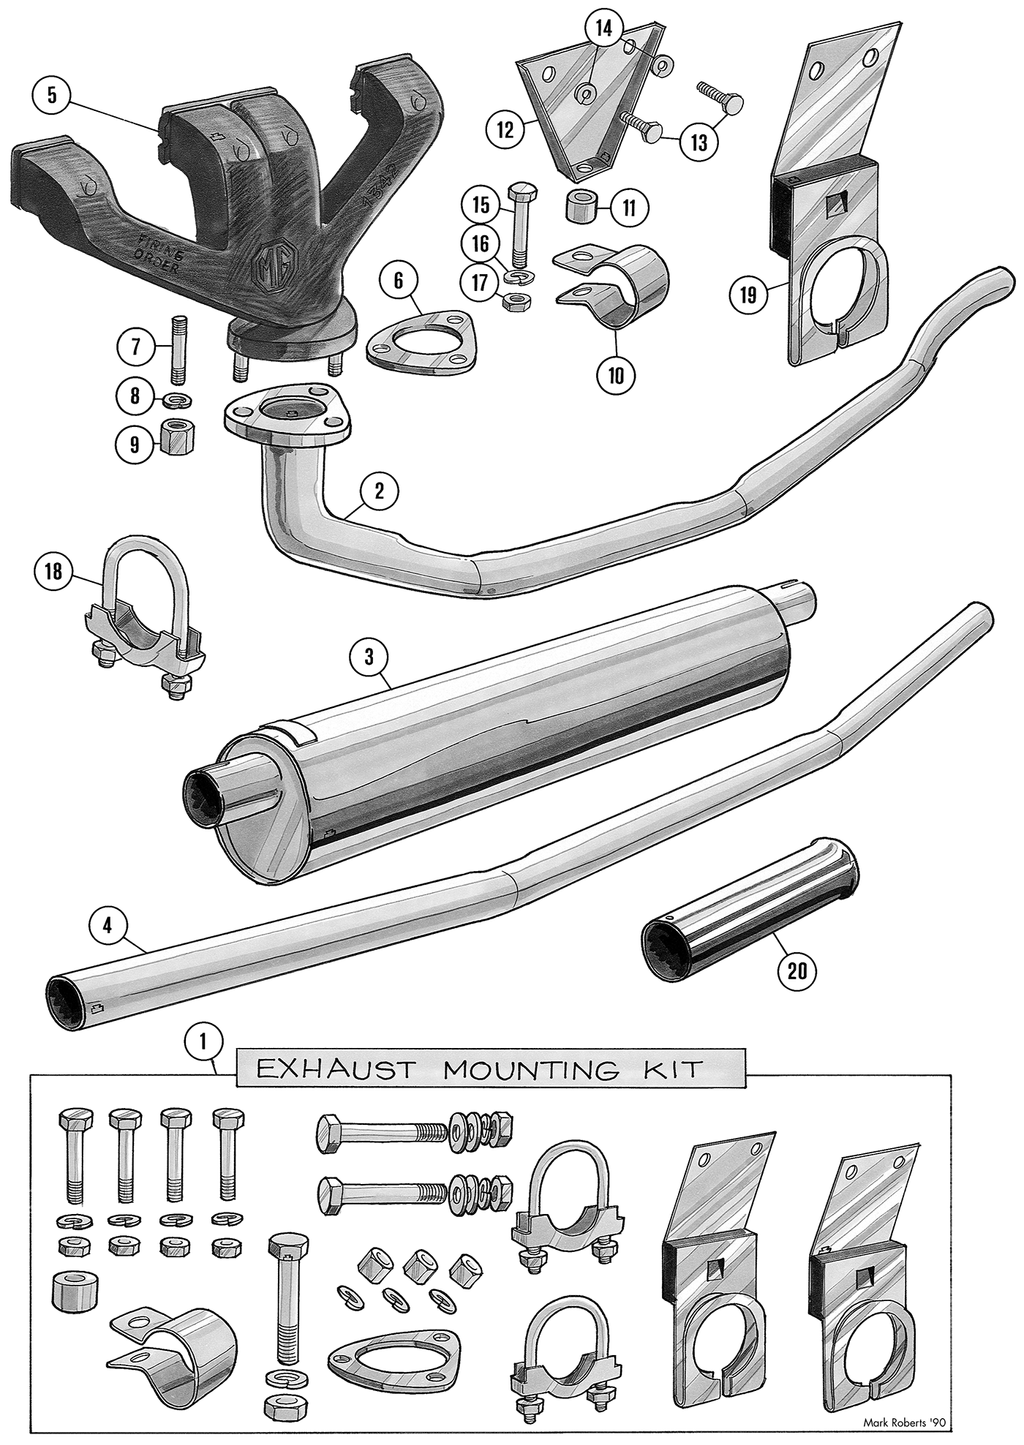 MGTD-TF 1949-1955 - Clamps, flanges & hangers - Exhaust system - 1